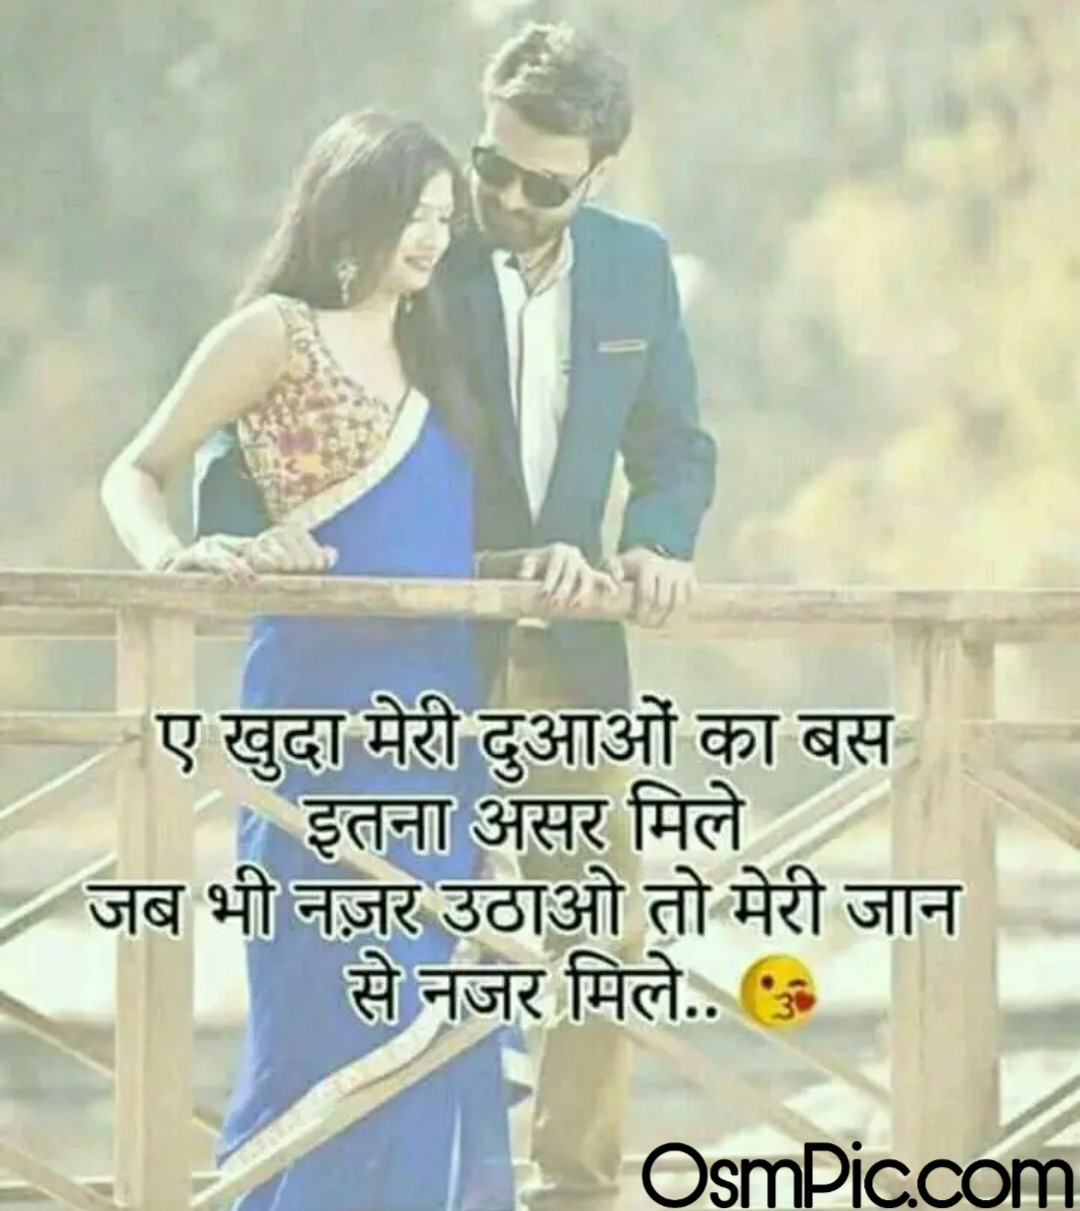 Top 50 Romantic Love Quotes Images In Hindi With Shayari Download